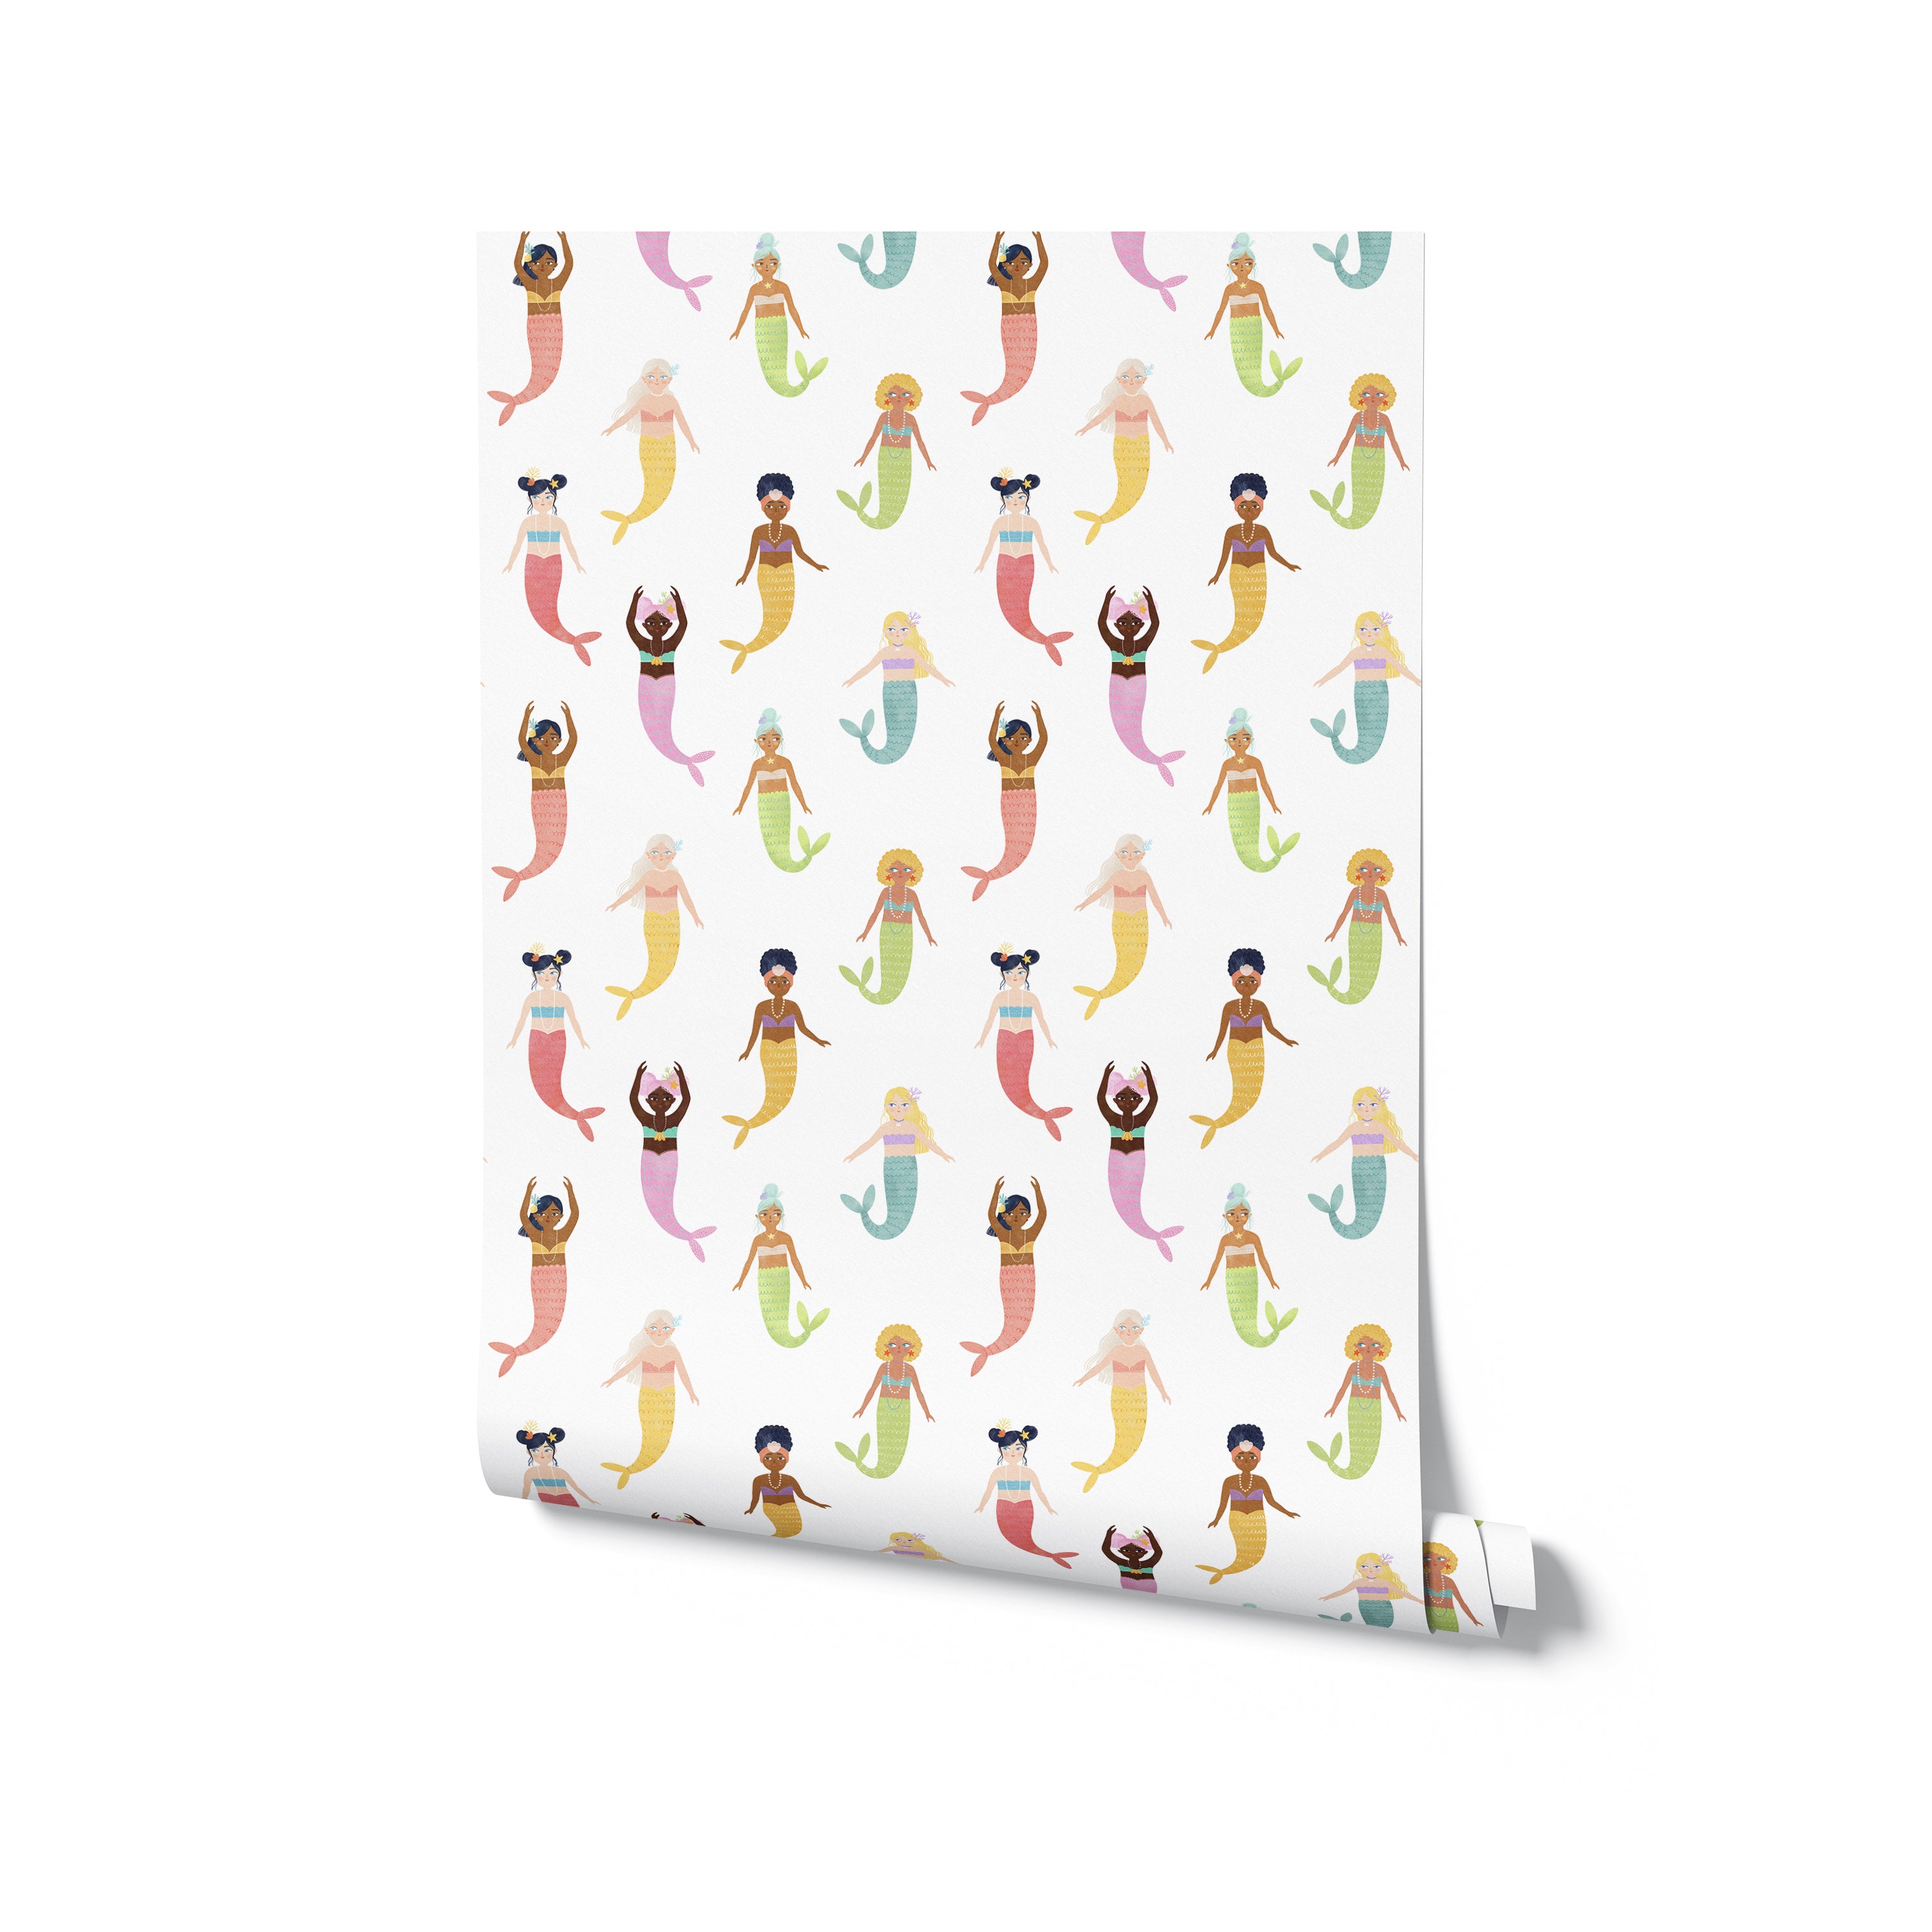 A roll of Little Mermaids Wallpaper displaying an enchanting array of mermaids, seashells, and underwater flora in pastel colors. This image highlights the wallpaper's whimsical design and vibrant colors, ideal for a child's bedroom or play area.